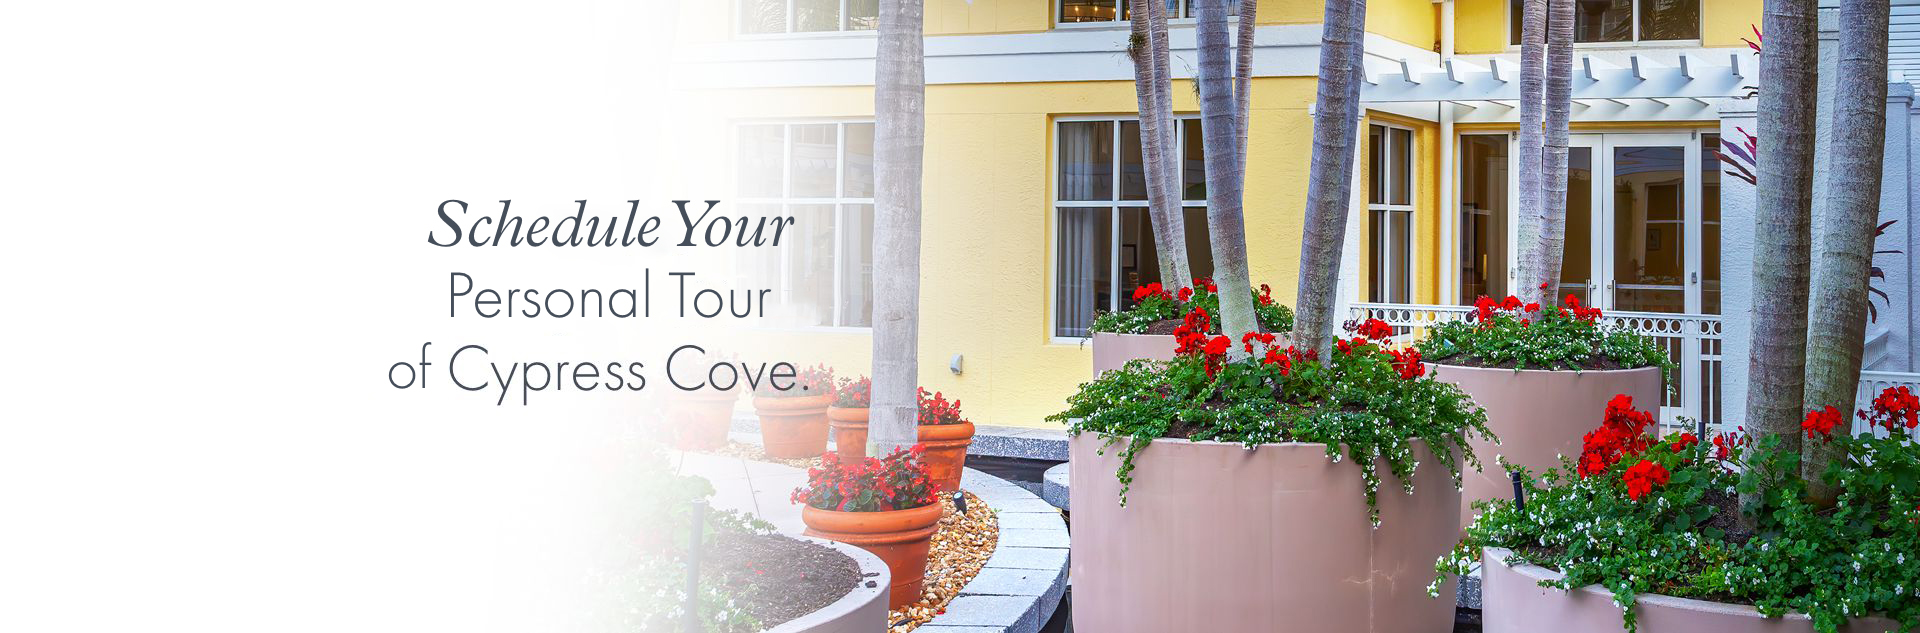 Request more information on Cypress Cove.